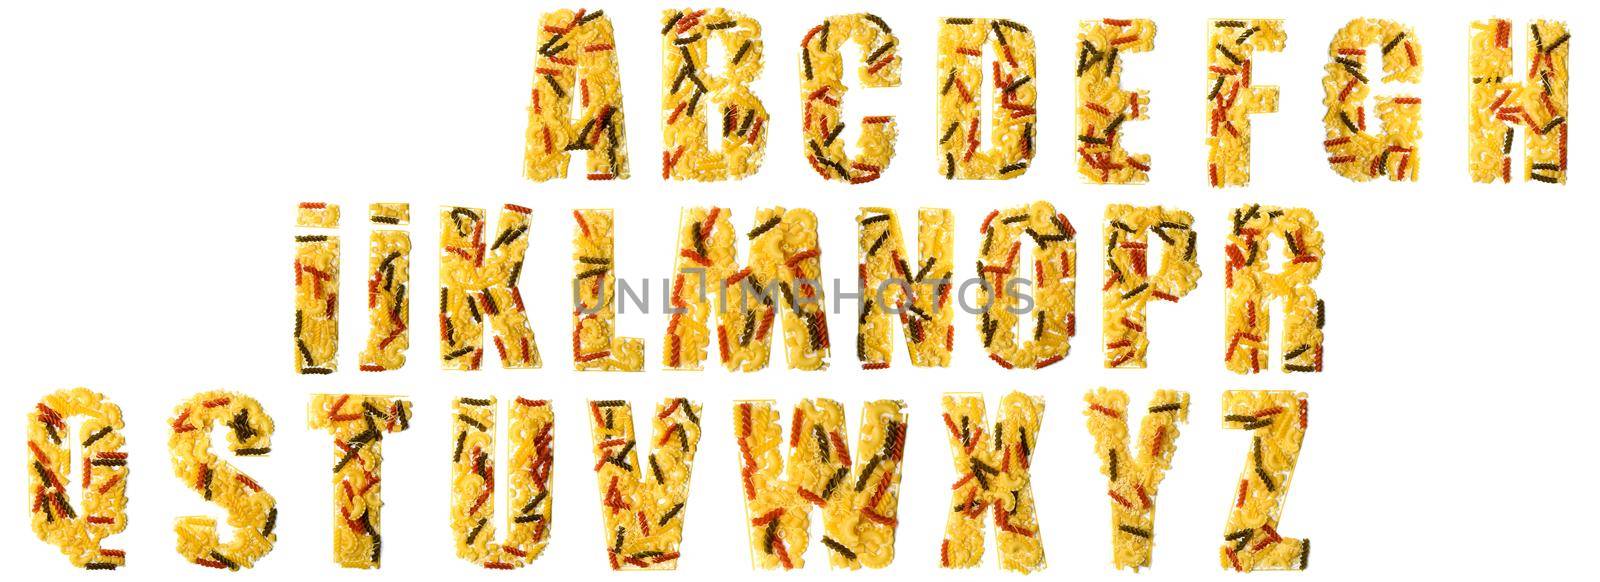 Pile of spaghetti forming a letters, all different shapes, colors and varieties isolated on a white background